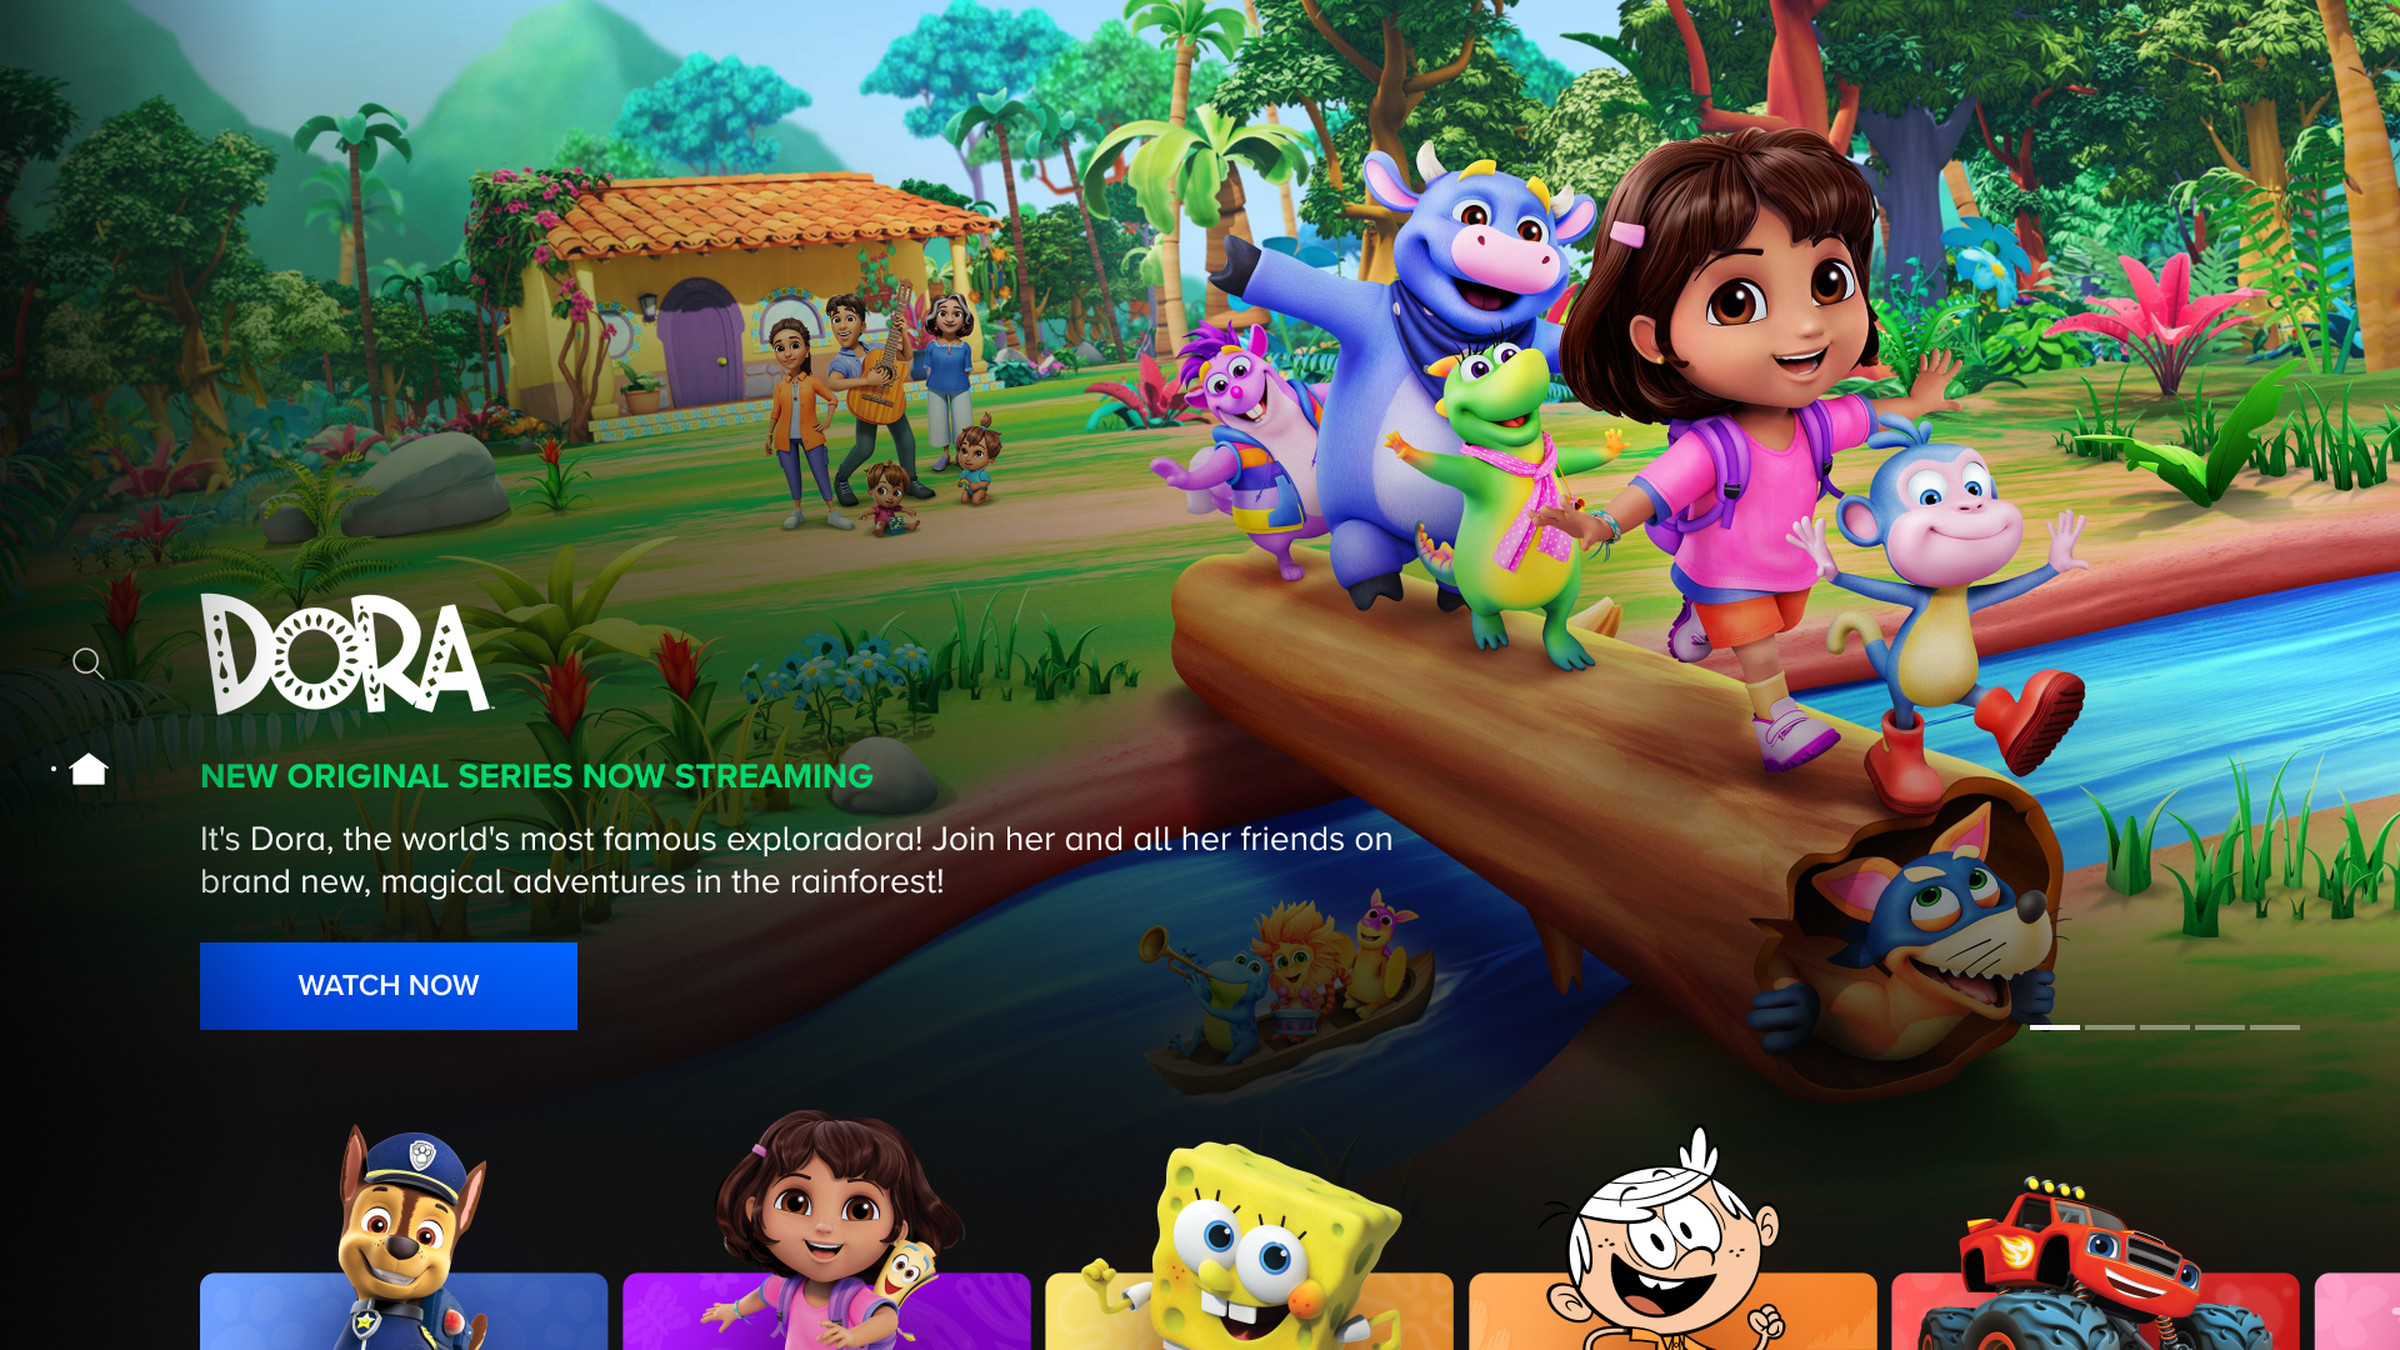 An image of a streaming service carousel with a very prominent image of Dora the Explorer.